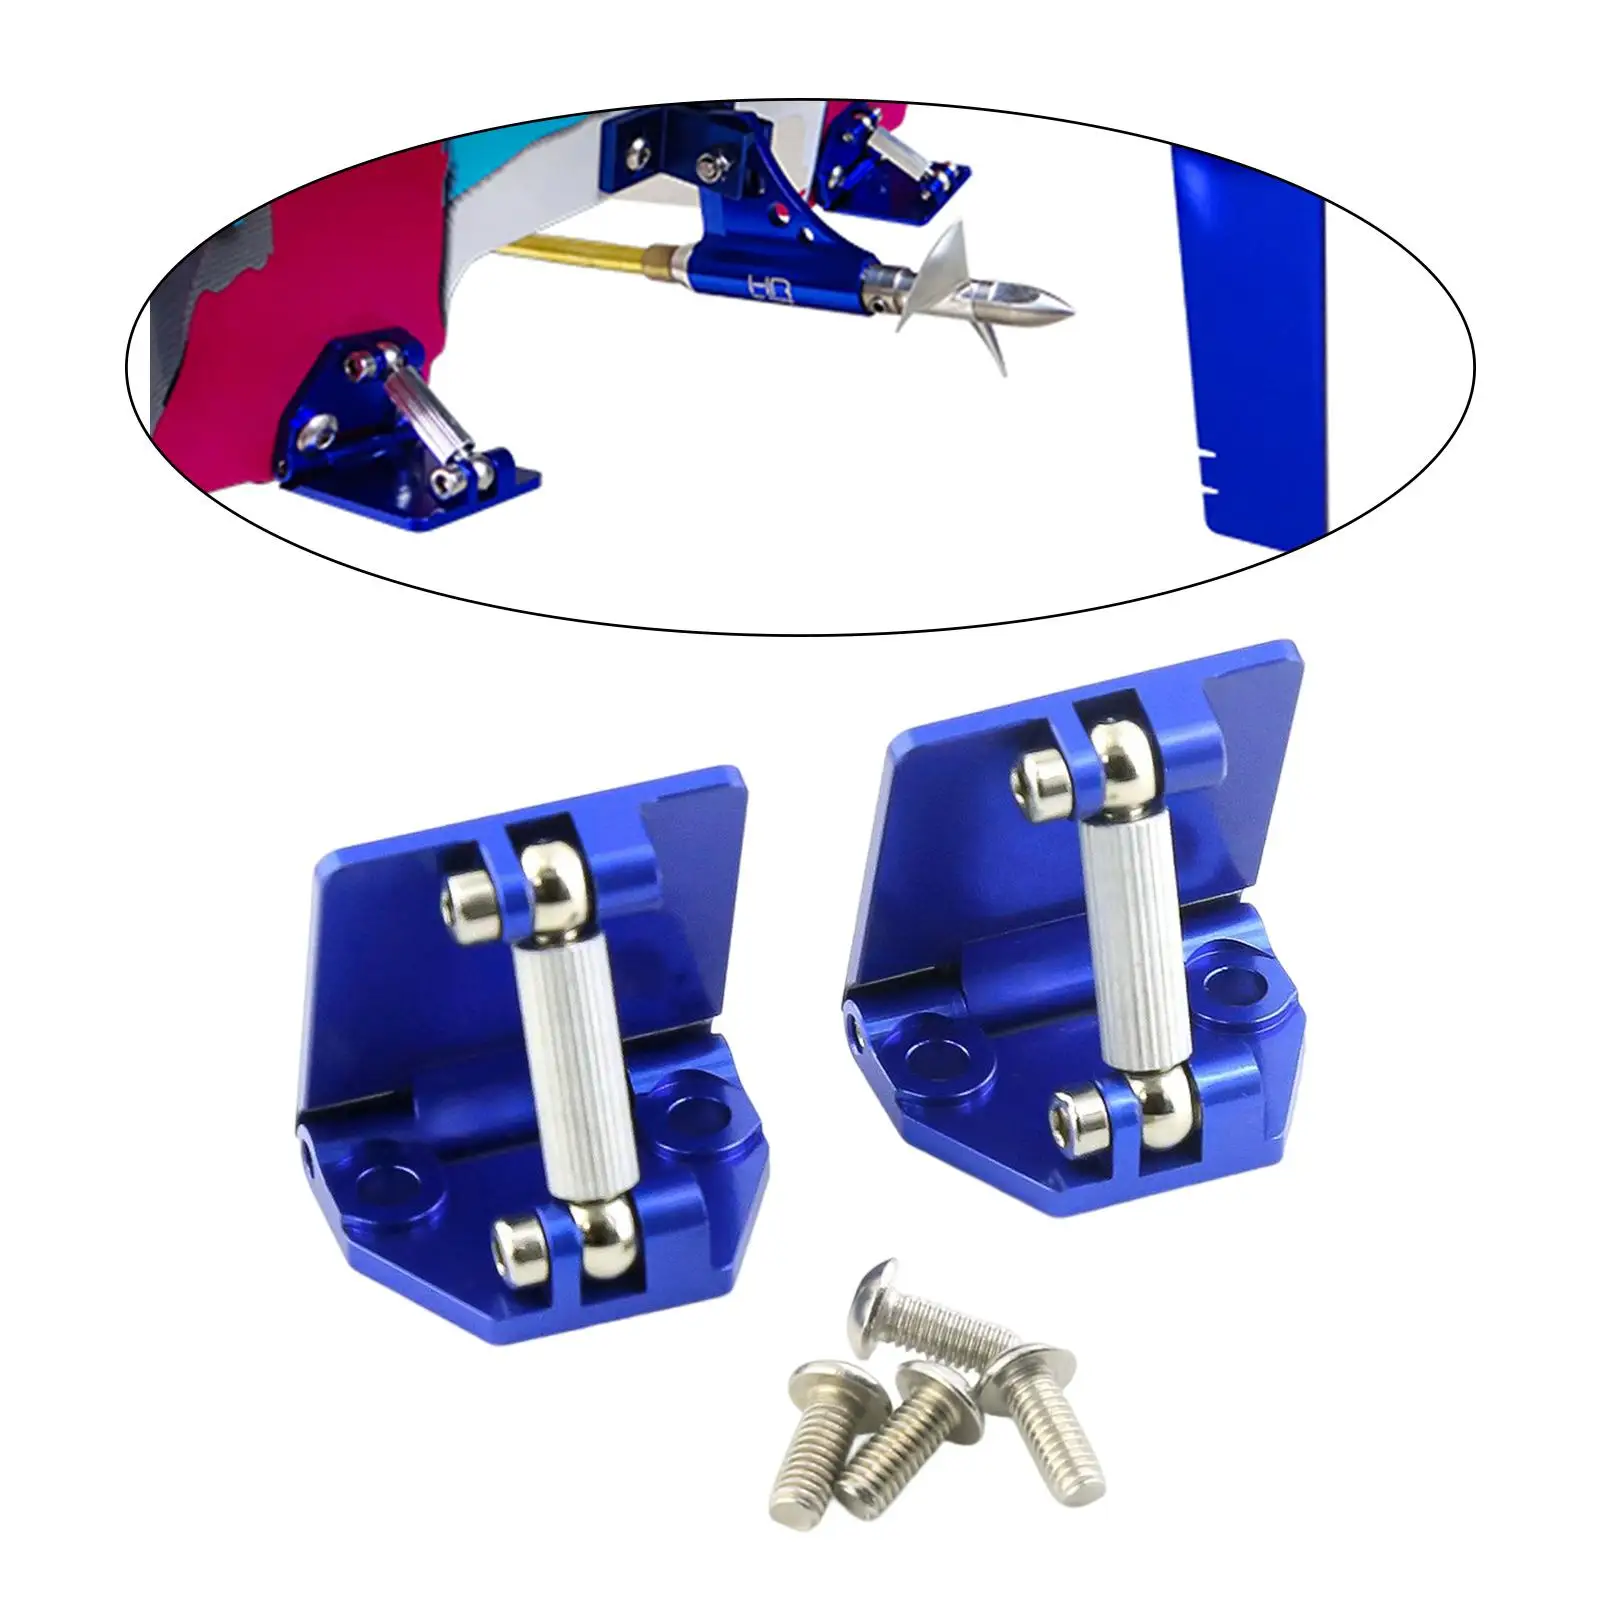 Adjustable , Sturdy Construction, Proper Hull Planing, Durable Blue, Portable Replacement Parts for 1/10 Dcb M41 Boats